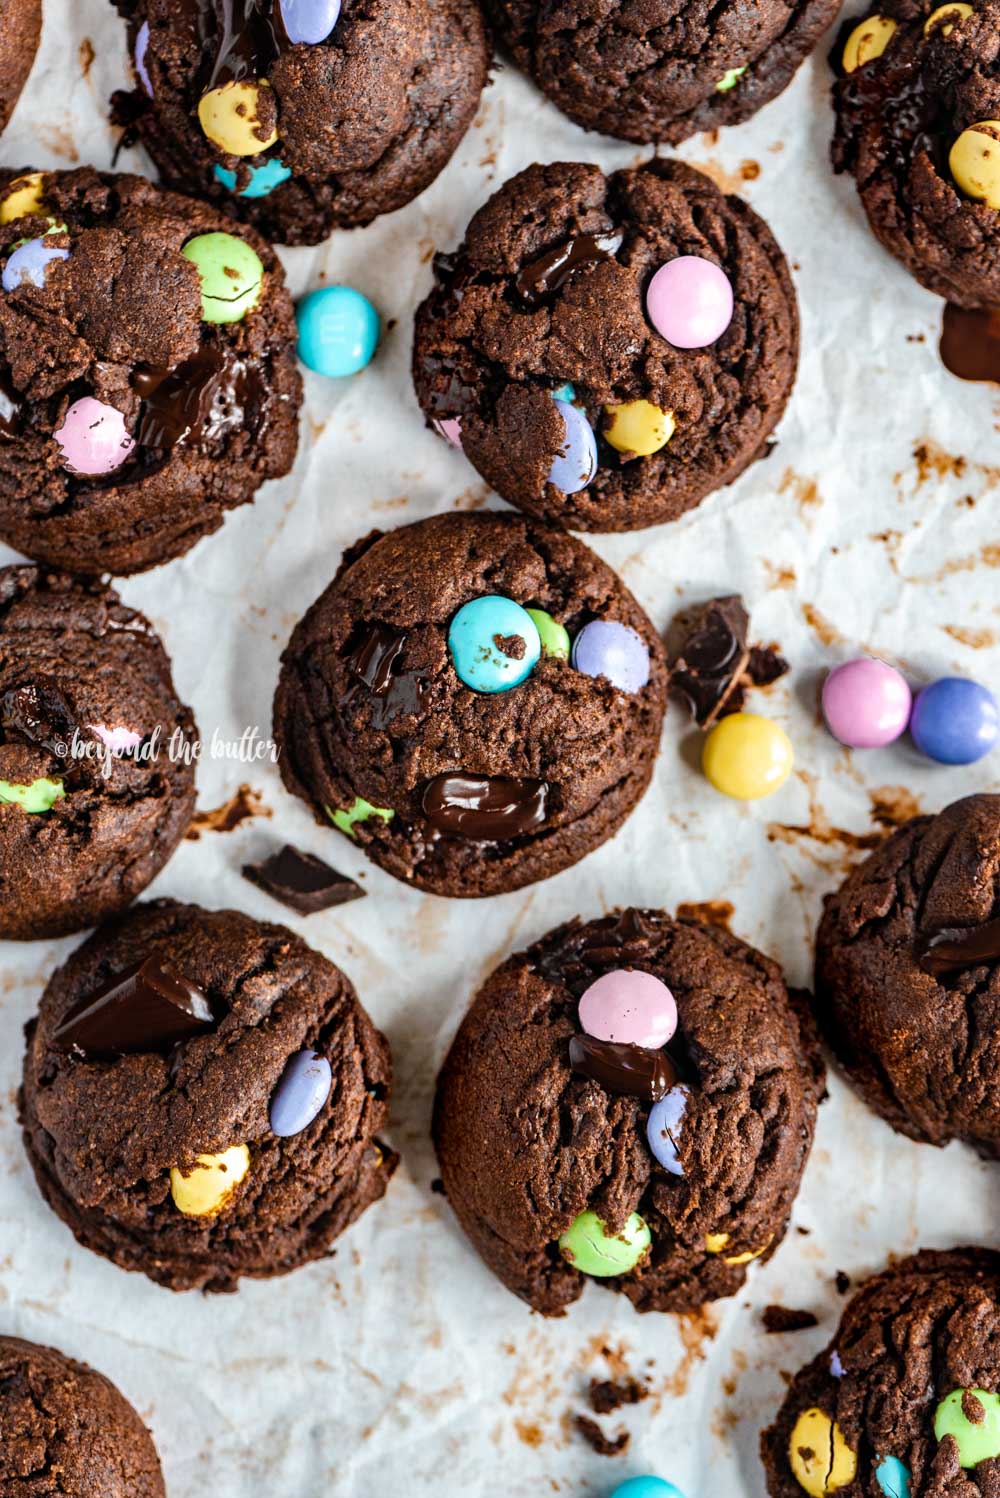 Overhead image of just baked double chocolate chunk m&m cookies | All Images © Beyond the Butter™